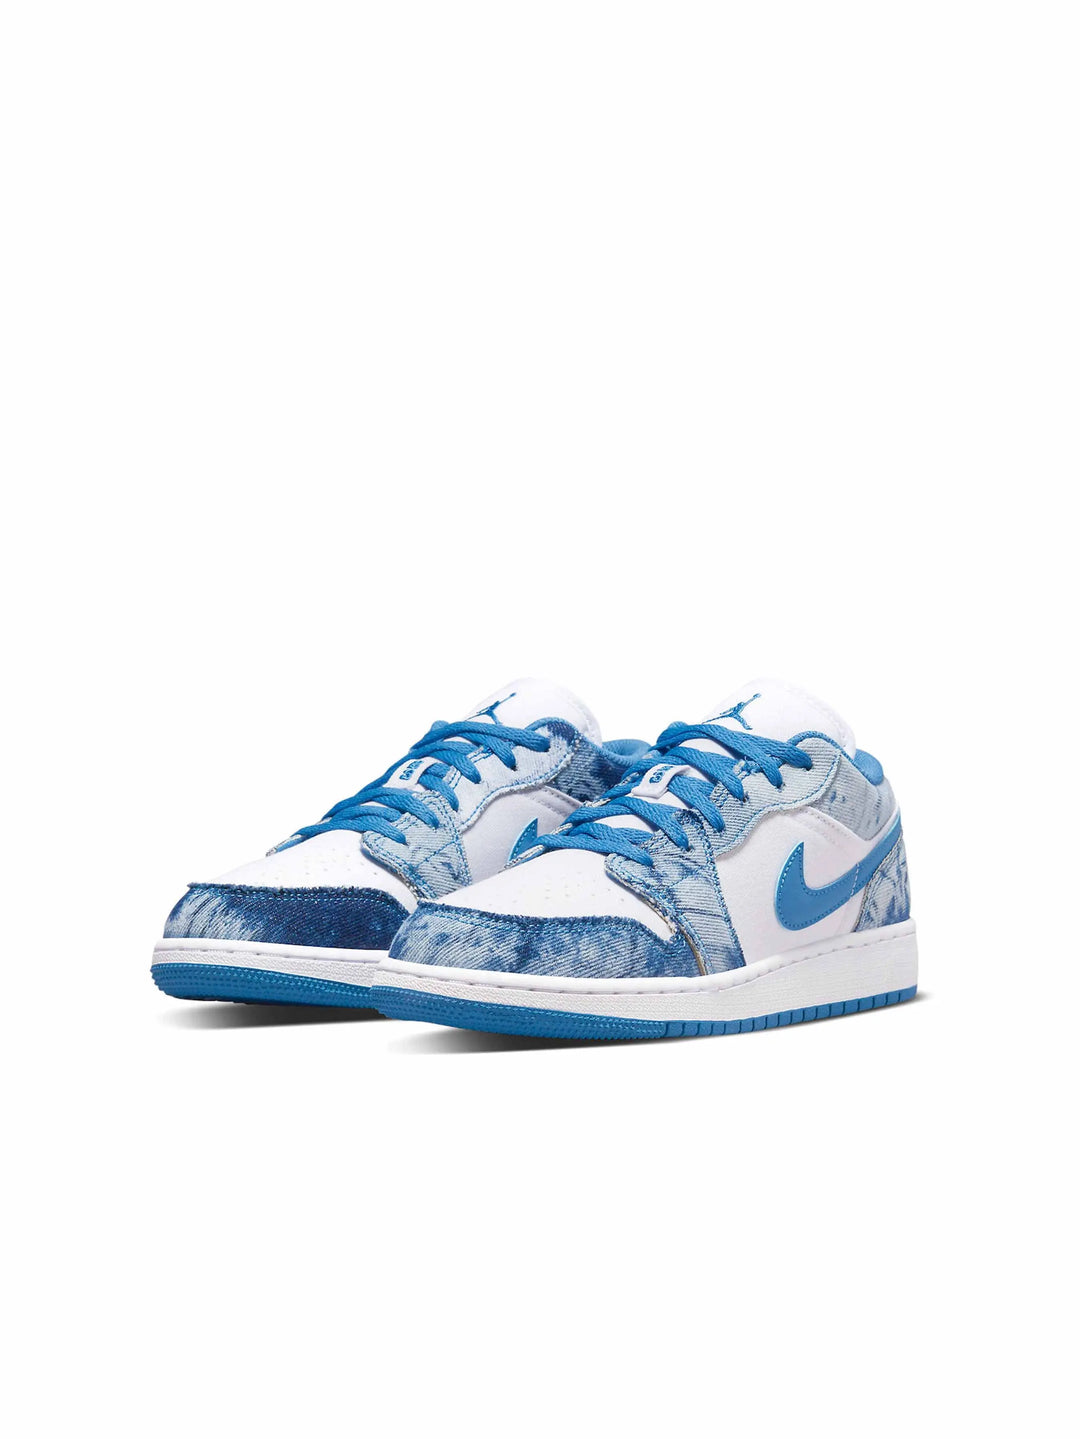 Nike Air Jordan 1 Low Washed Denim (GS) in Auckland, New Zealand - Shop name